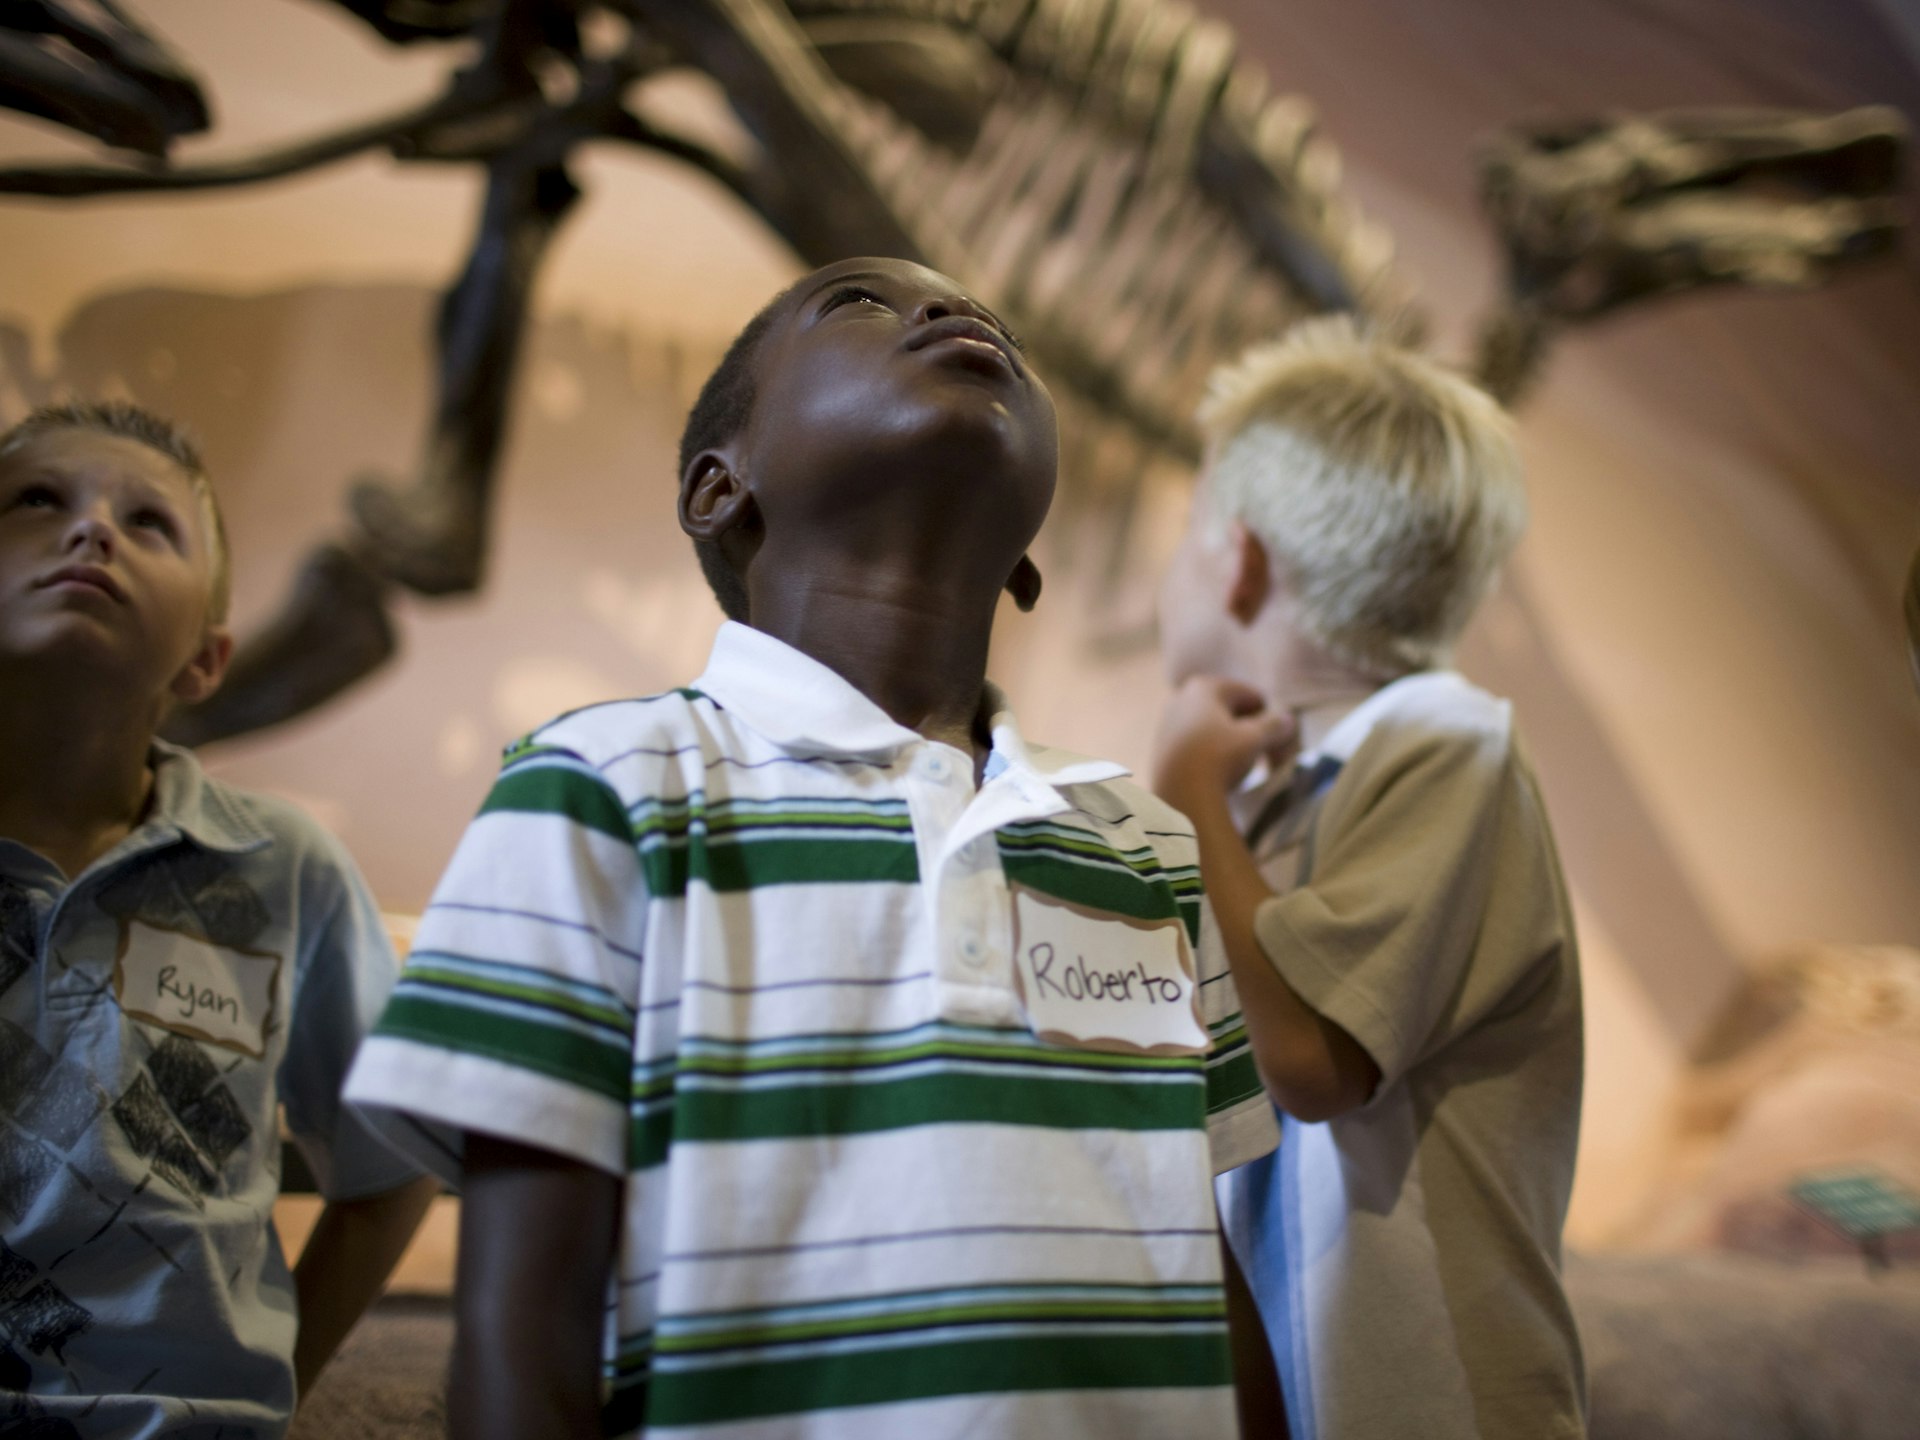 A young boy gazing up at dinosaur exhibits in a museum